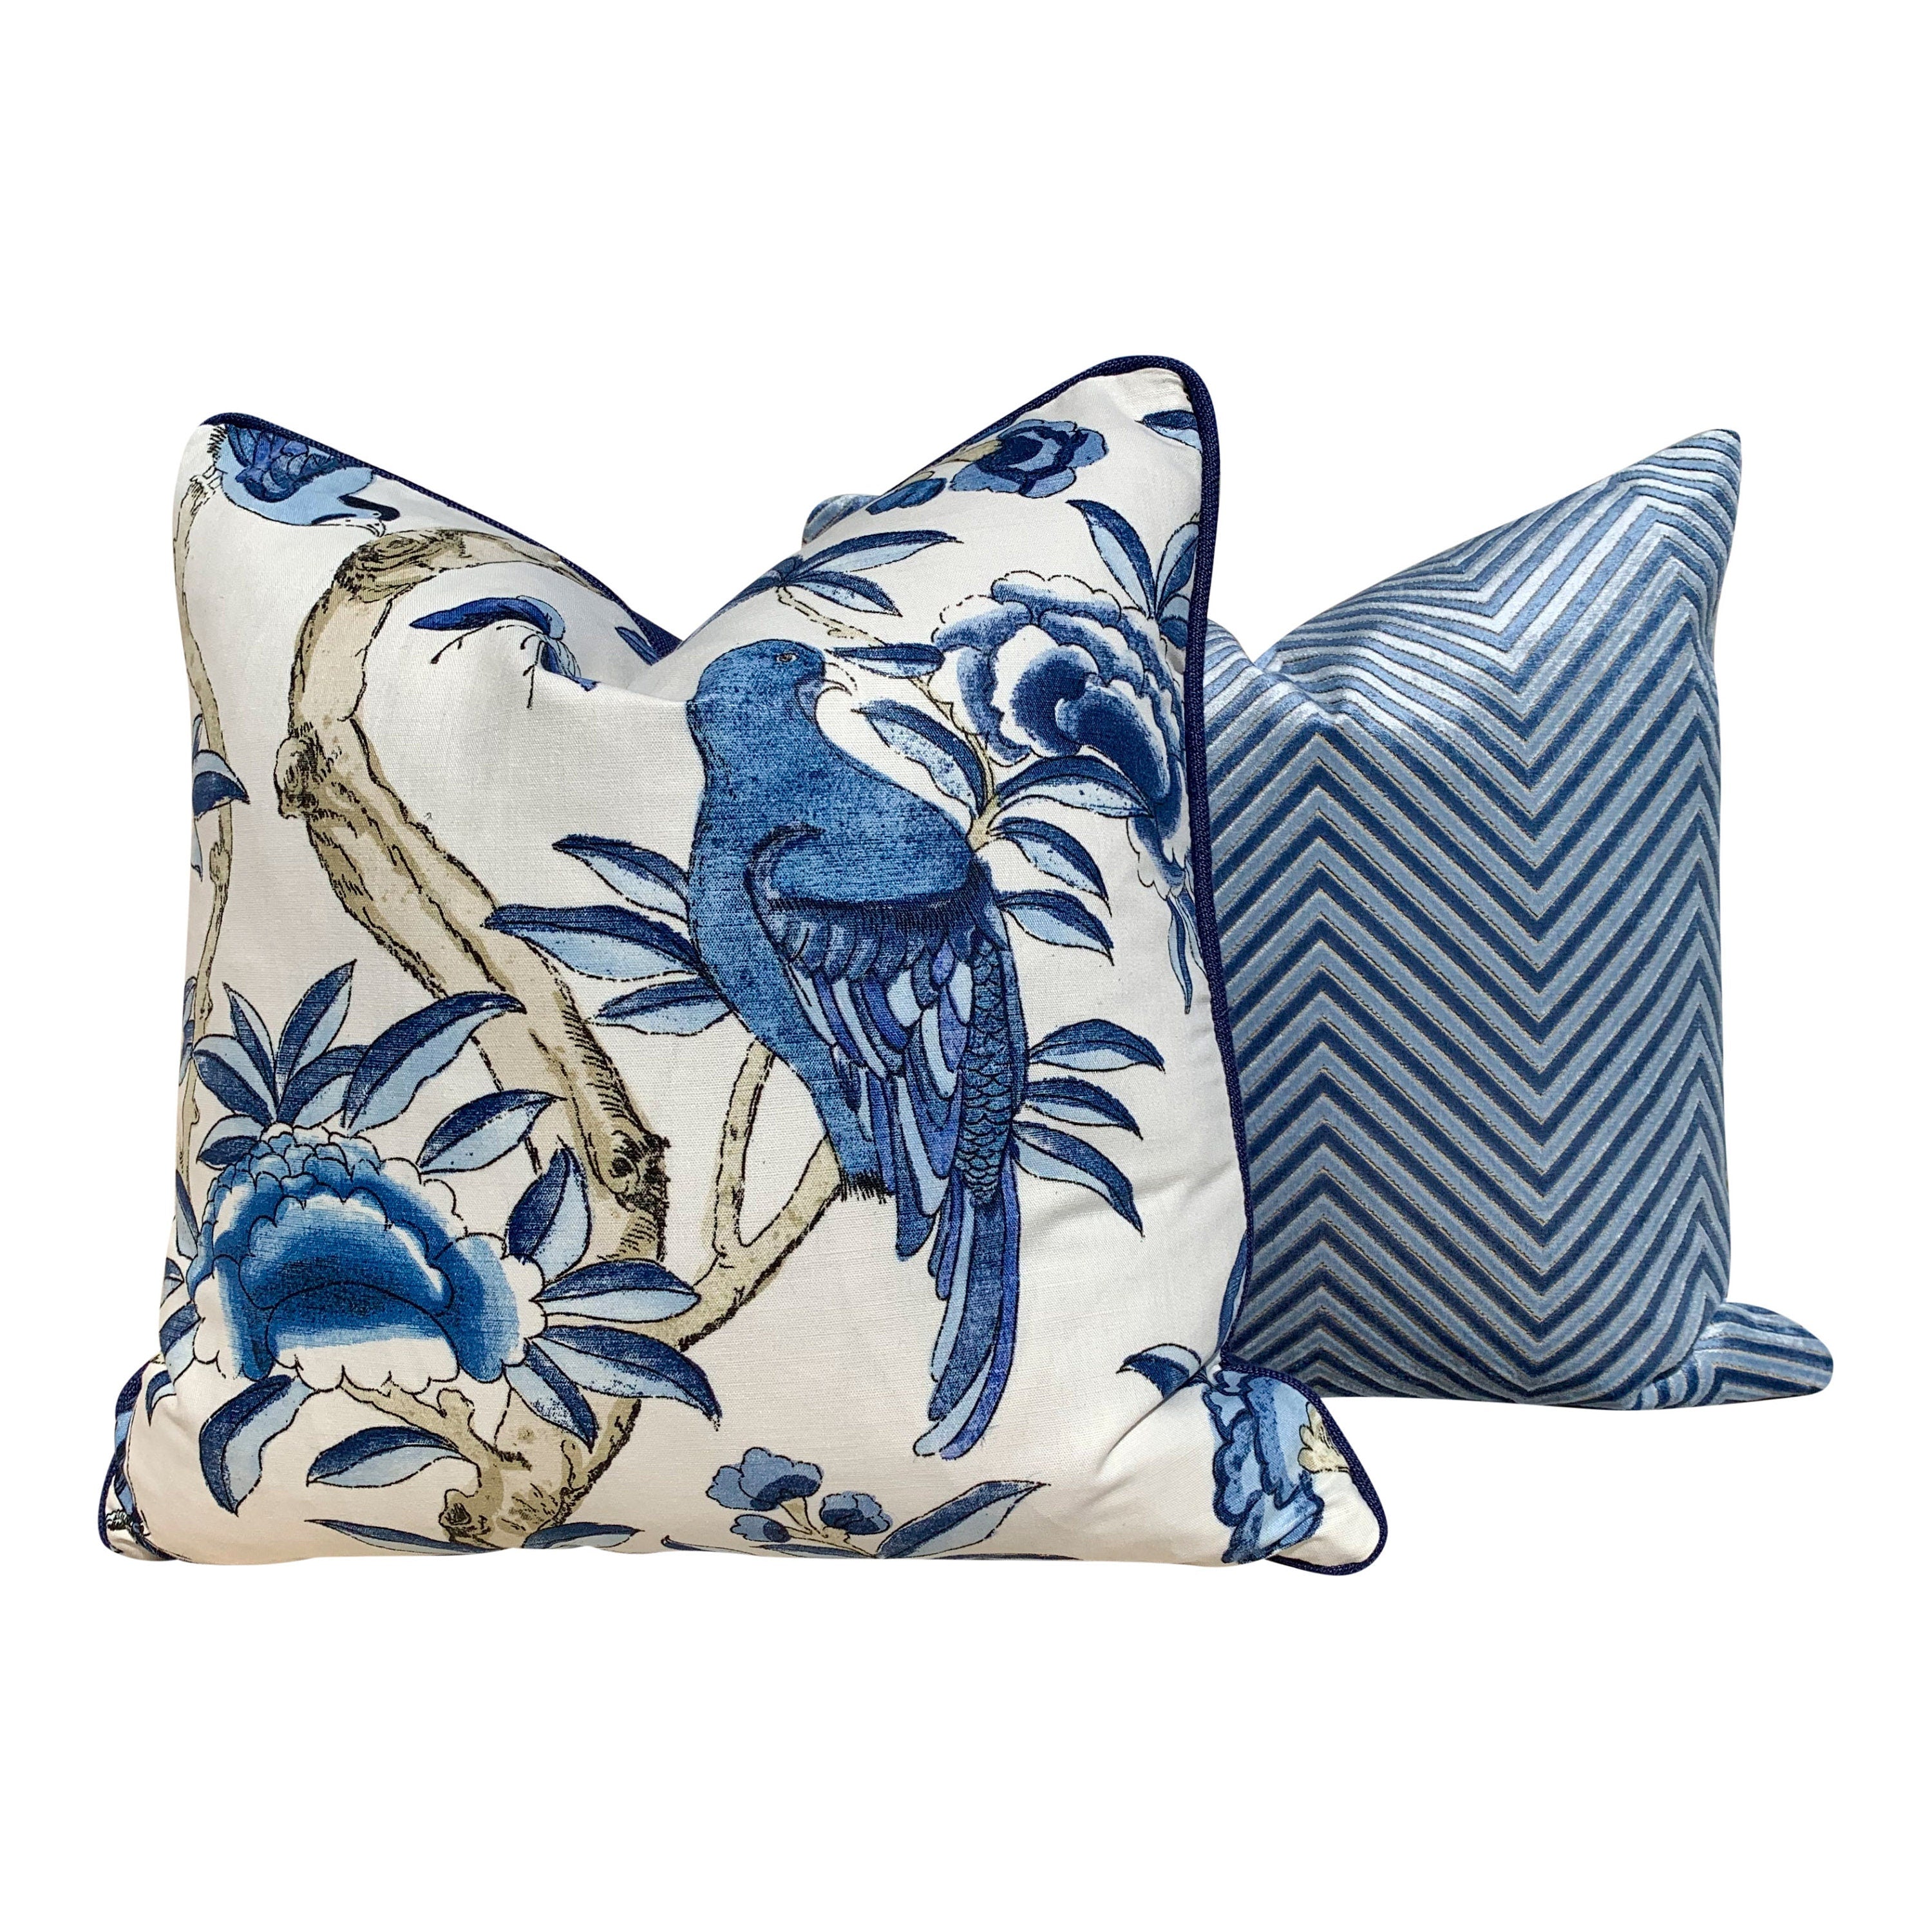 Thibaut Giselle Linen Pillow In Blue, Navy Pipping. Decorative Pillow Cover, Accent throw cushion, Designer Pillow, Lumbar throw pillow